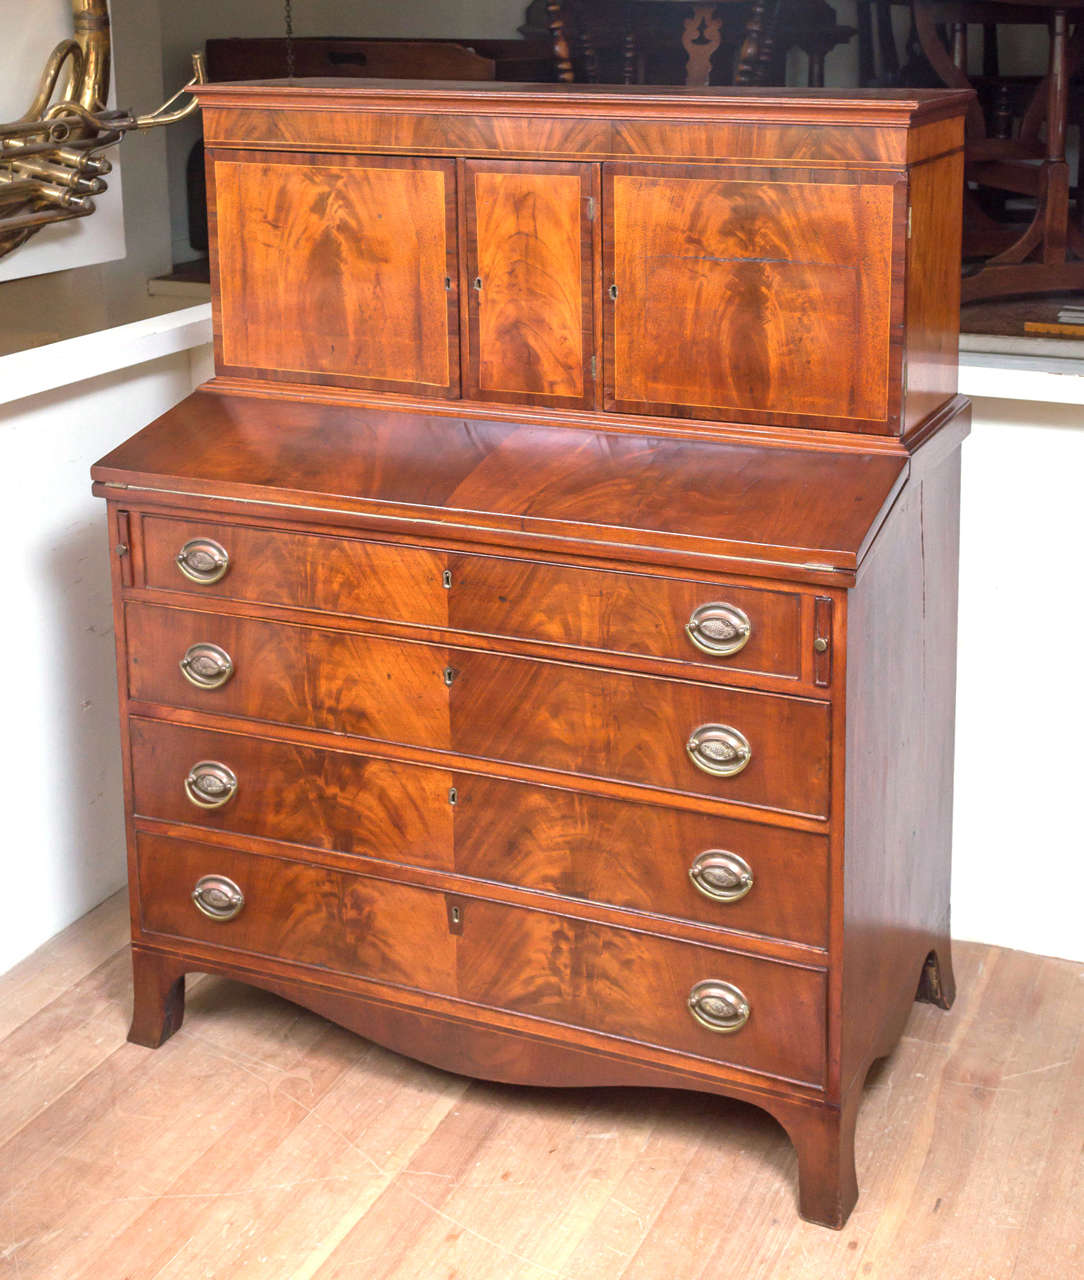 19th century American federal mahogany secretary desk, circa 1815. A fully fitted cabinet sets above the writing surface and four graduated drawers below. Beautiful figured crotch mahogany veneers and crossbanded line inlaid woods on the cabinet.